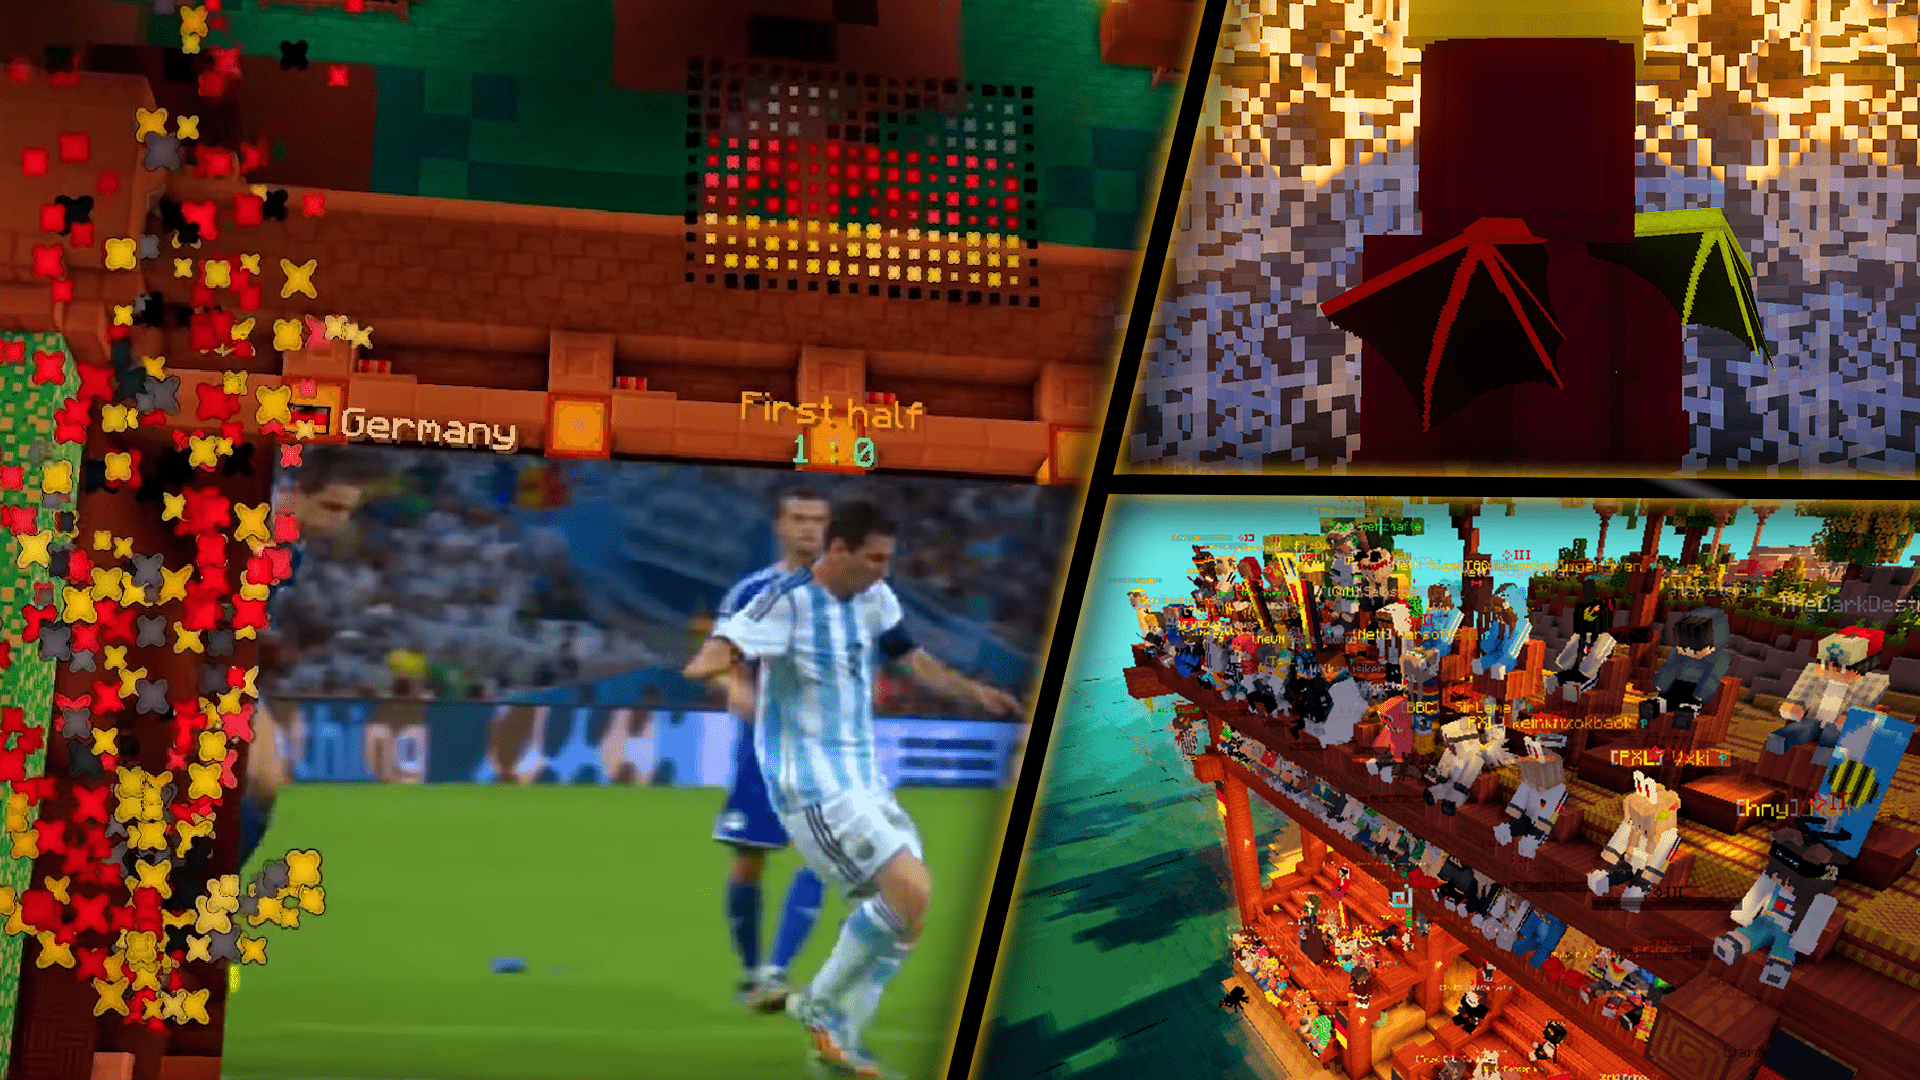 The LabyMod World Cup Viewing